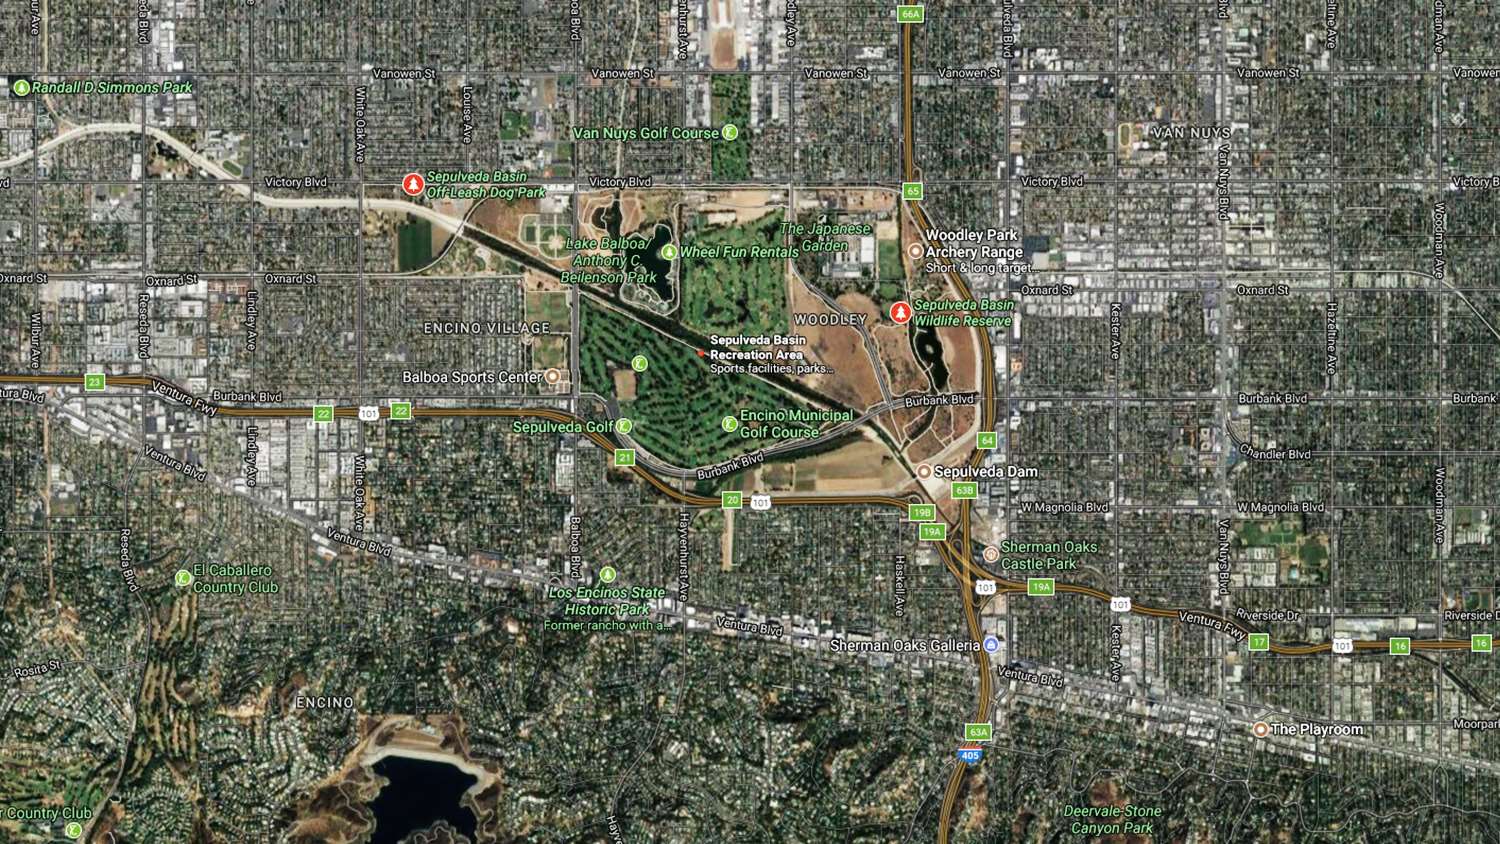 Sepulveda Basin Park has Indoor and outdoor sports facilities, community garden, amusement parks and two golf courses